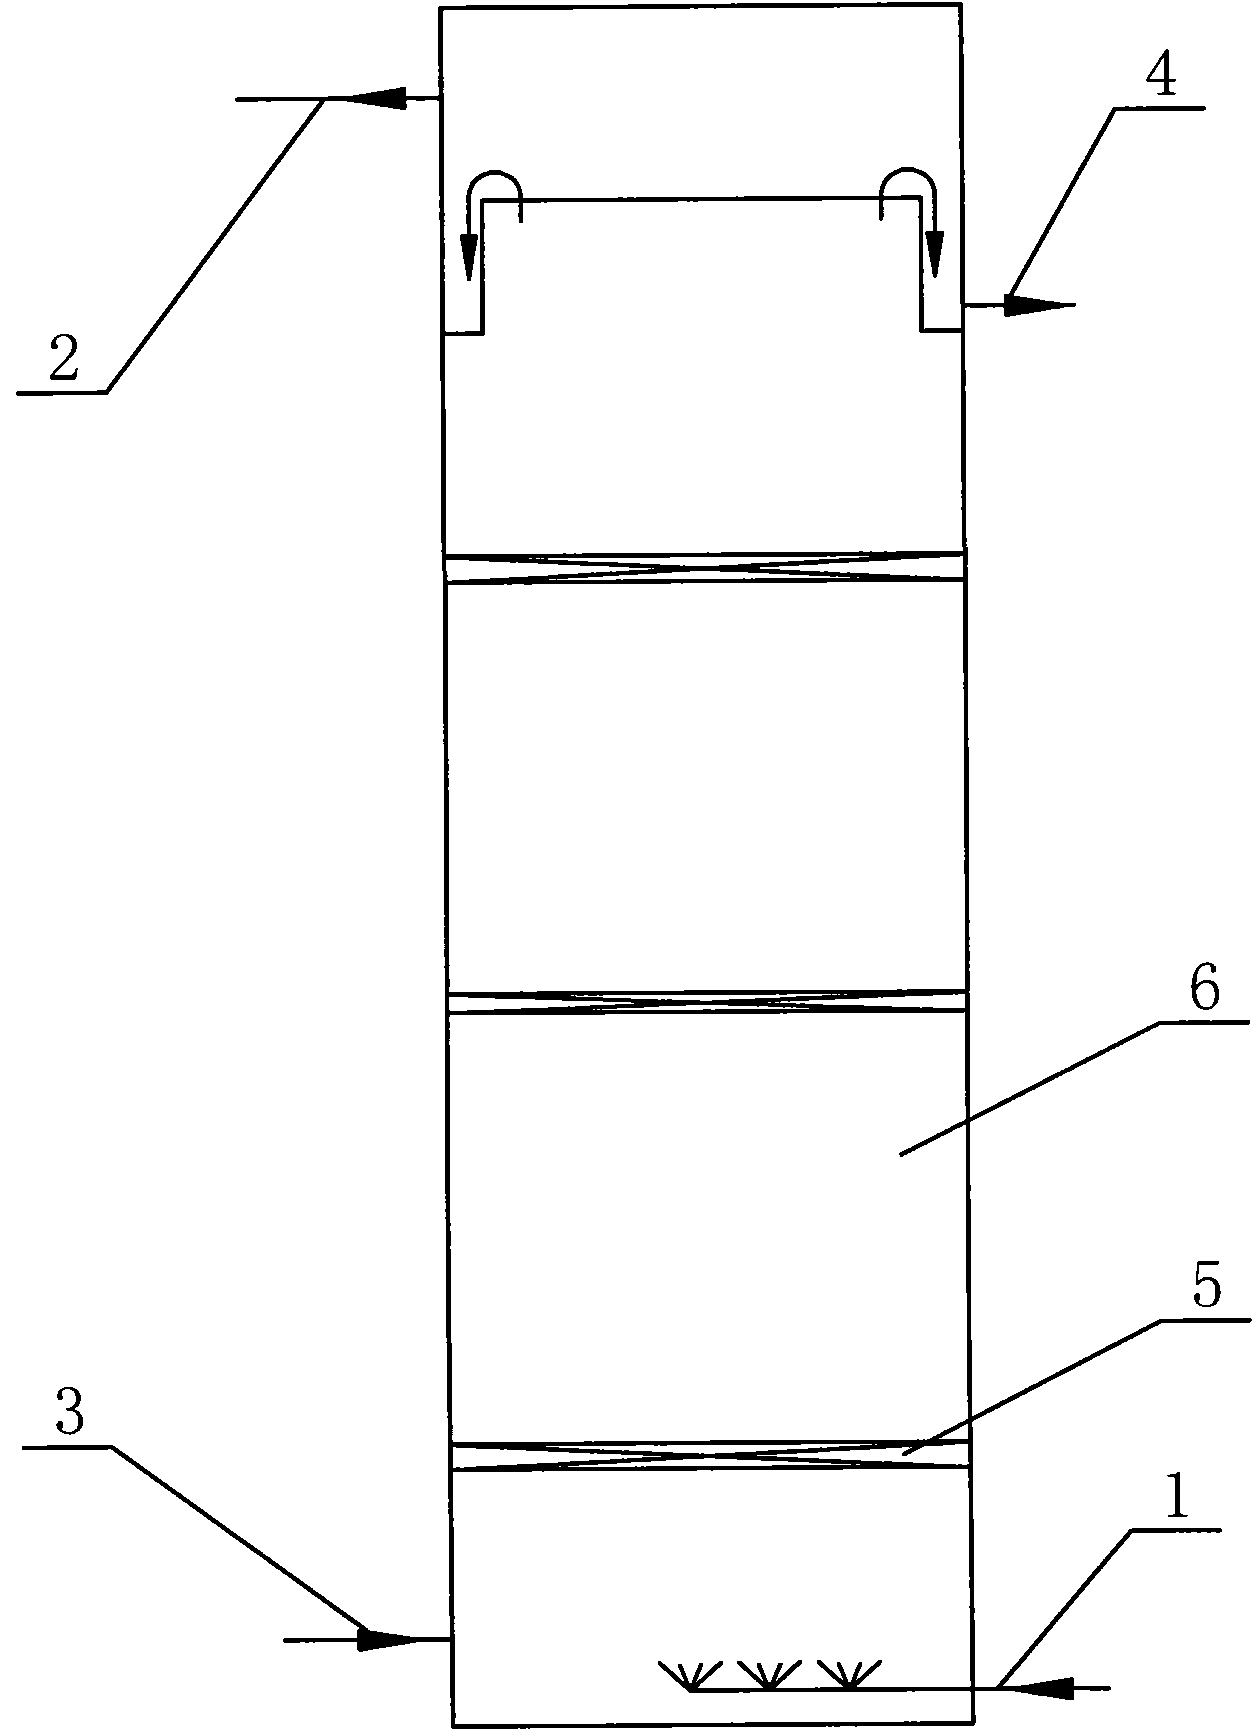 Method and device for removing hydrogen sulfide from gas by using suspension of ferric oxide powder